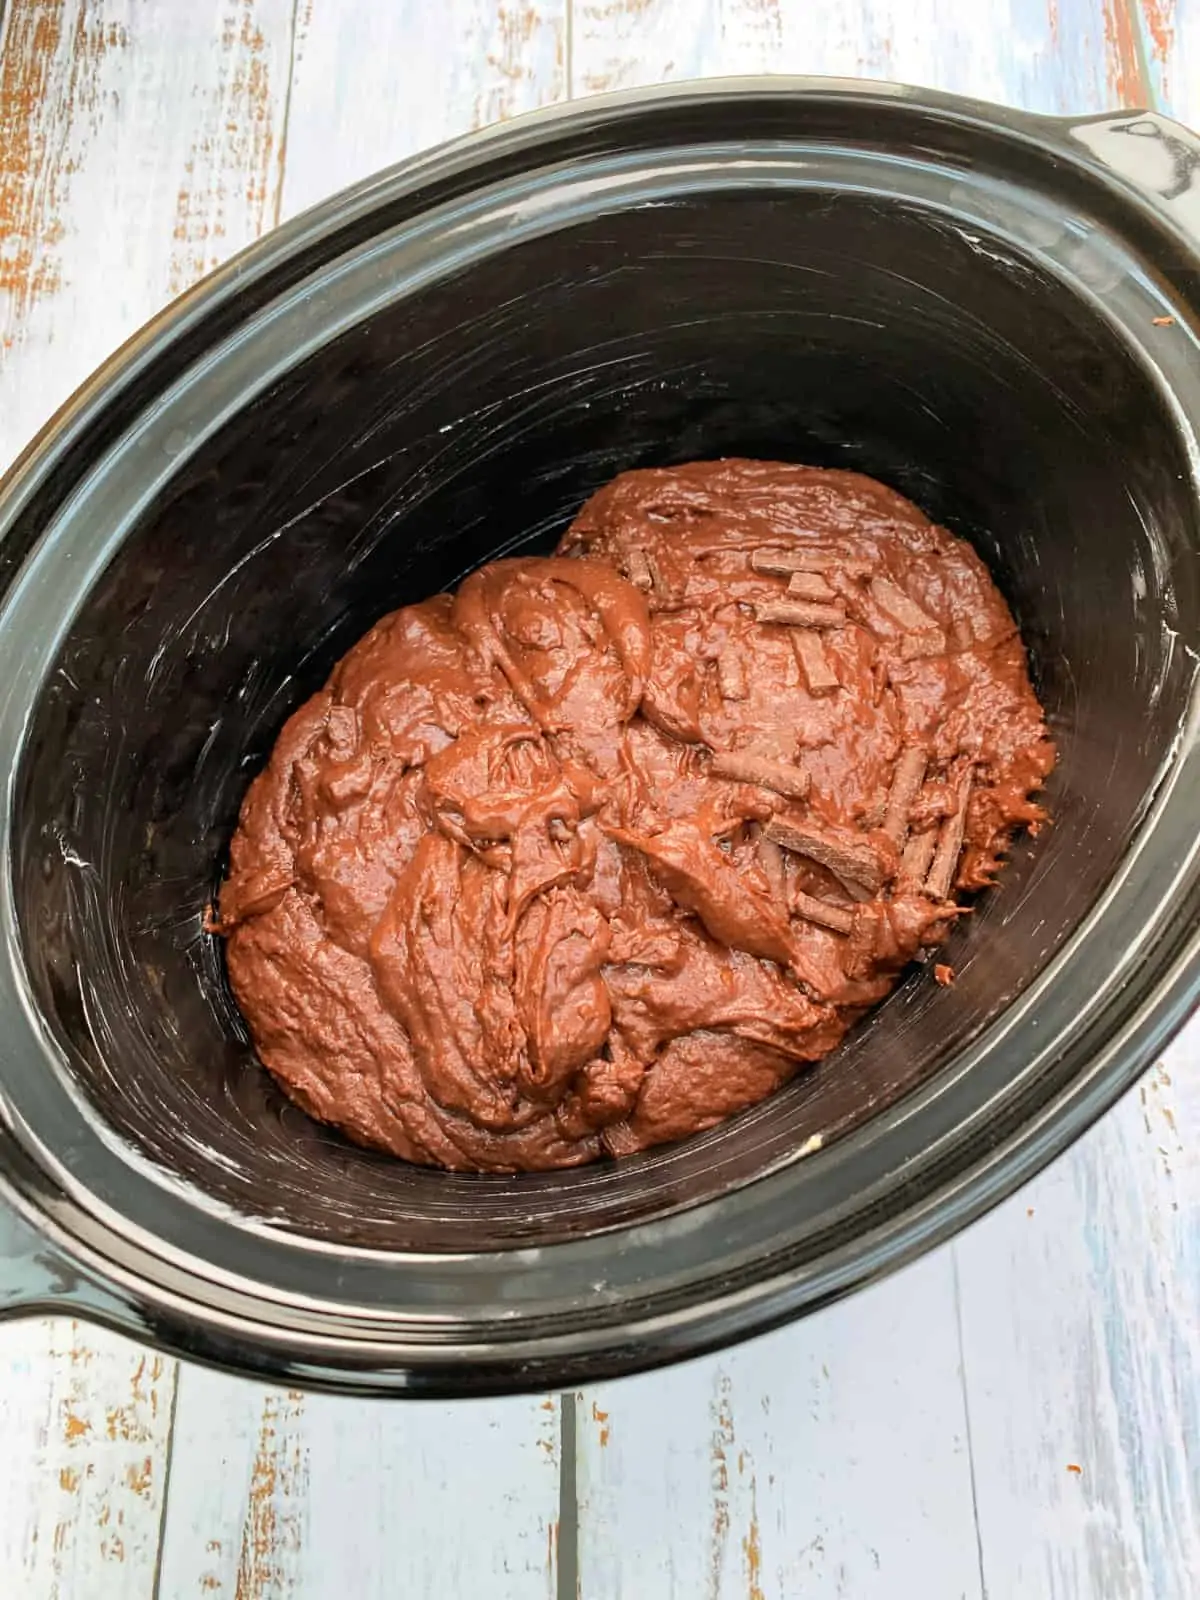 Slow cooker pot with chocolate cake mixture in it.